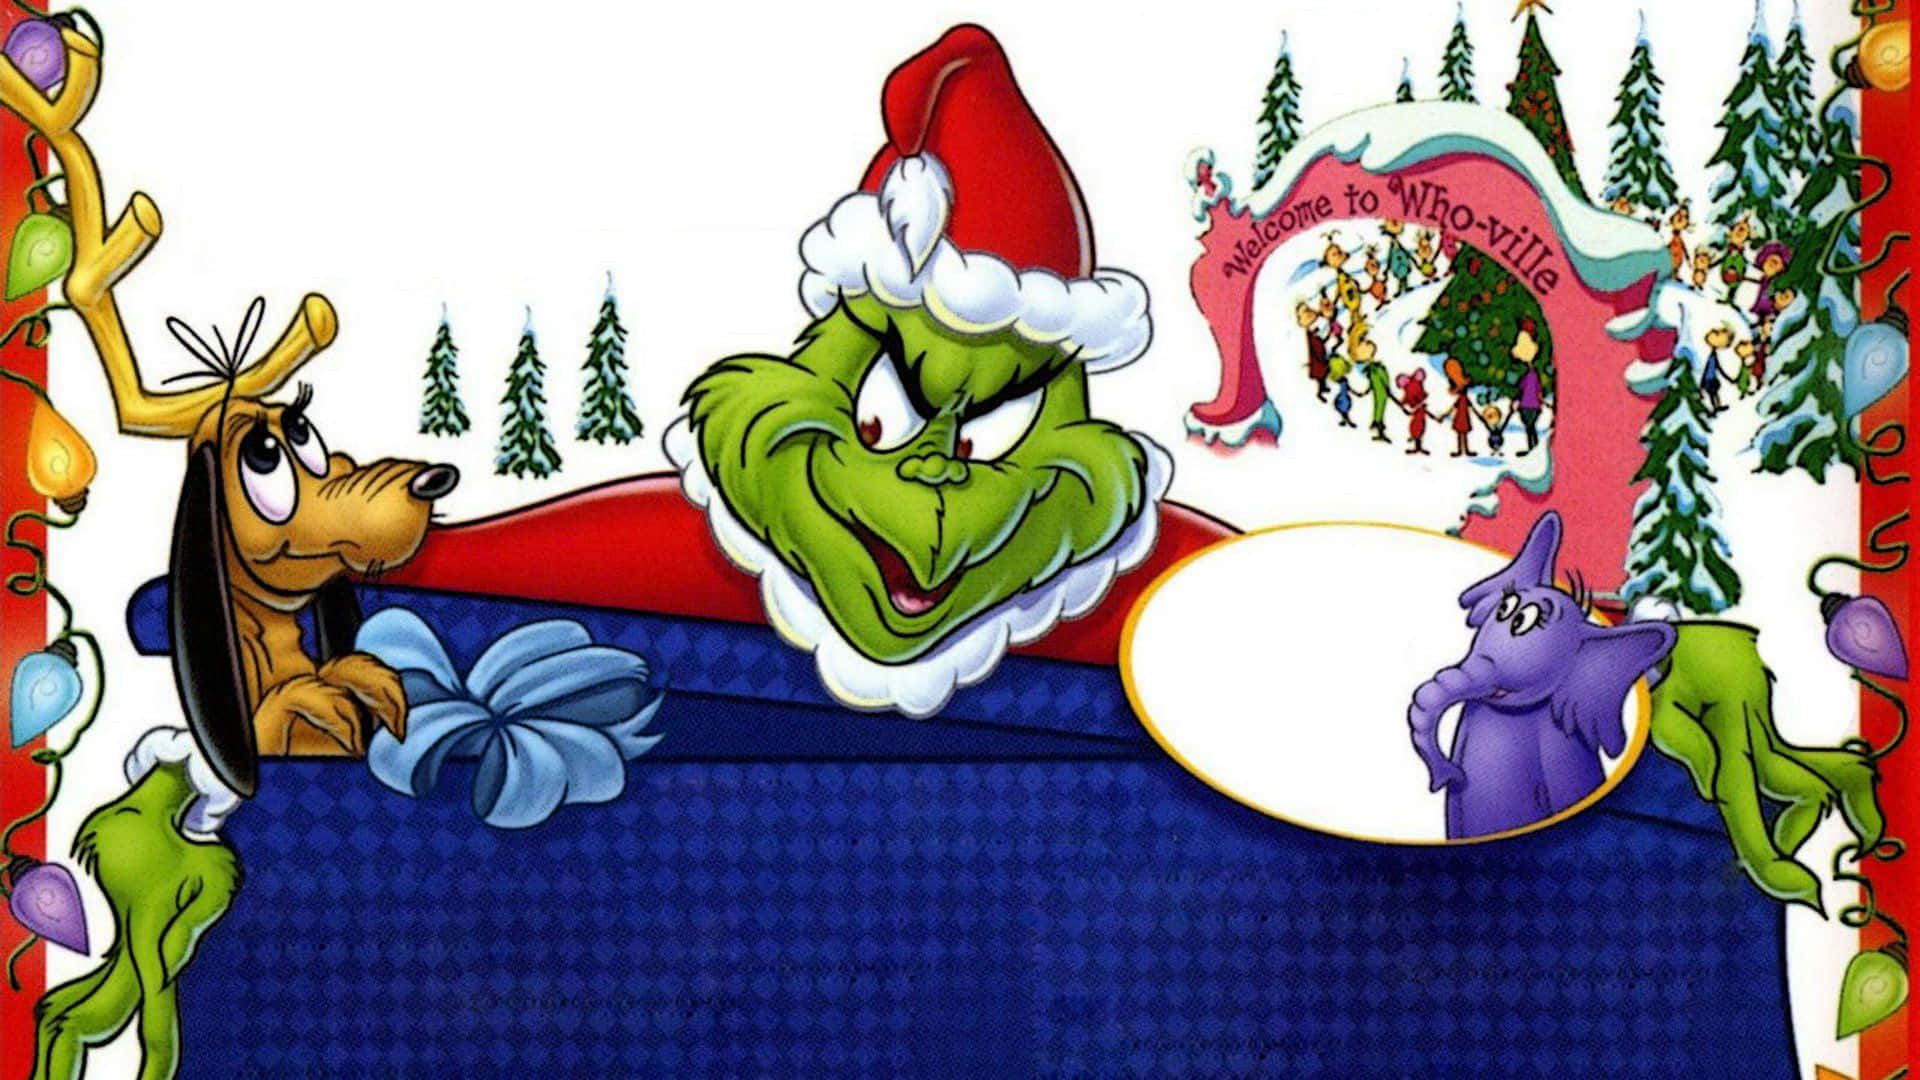 The Grinch Christmas Card Background